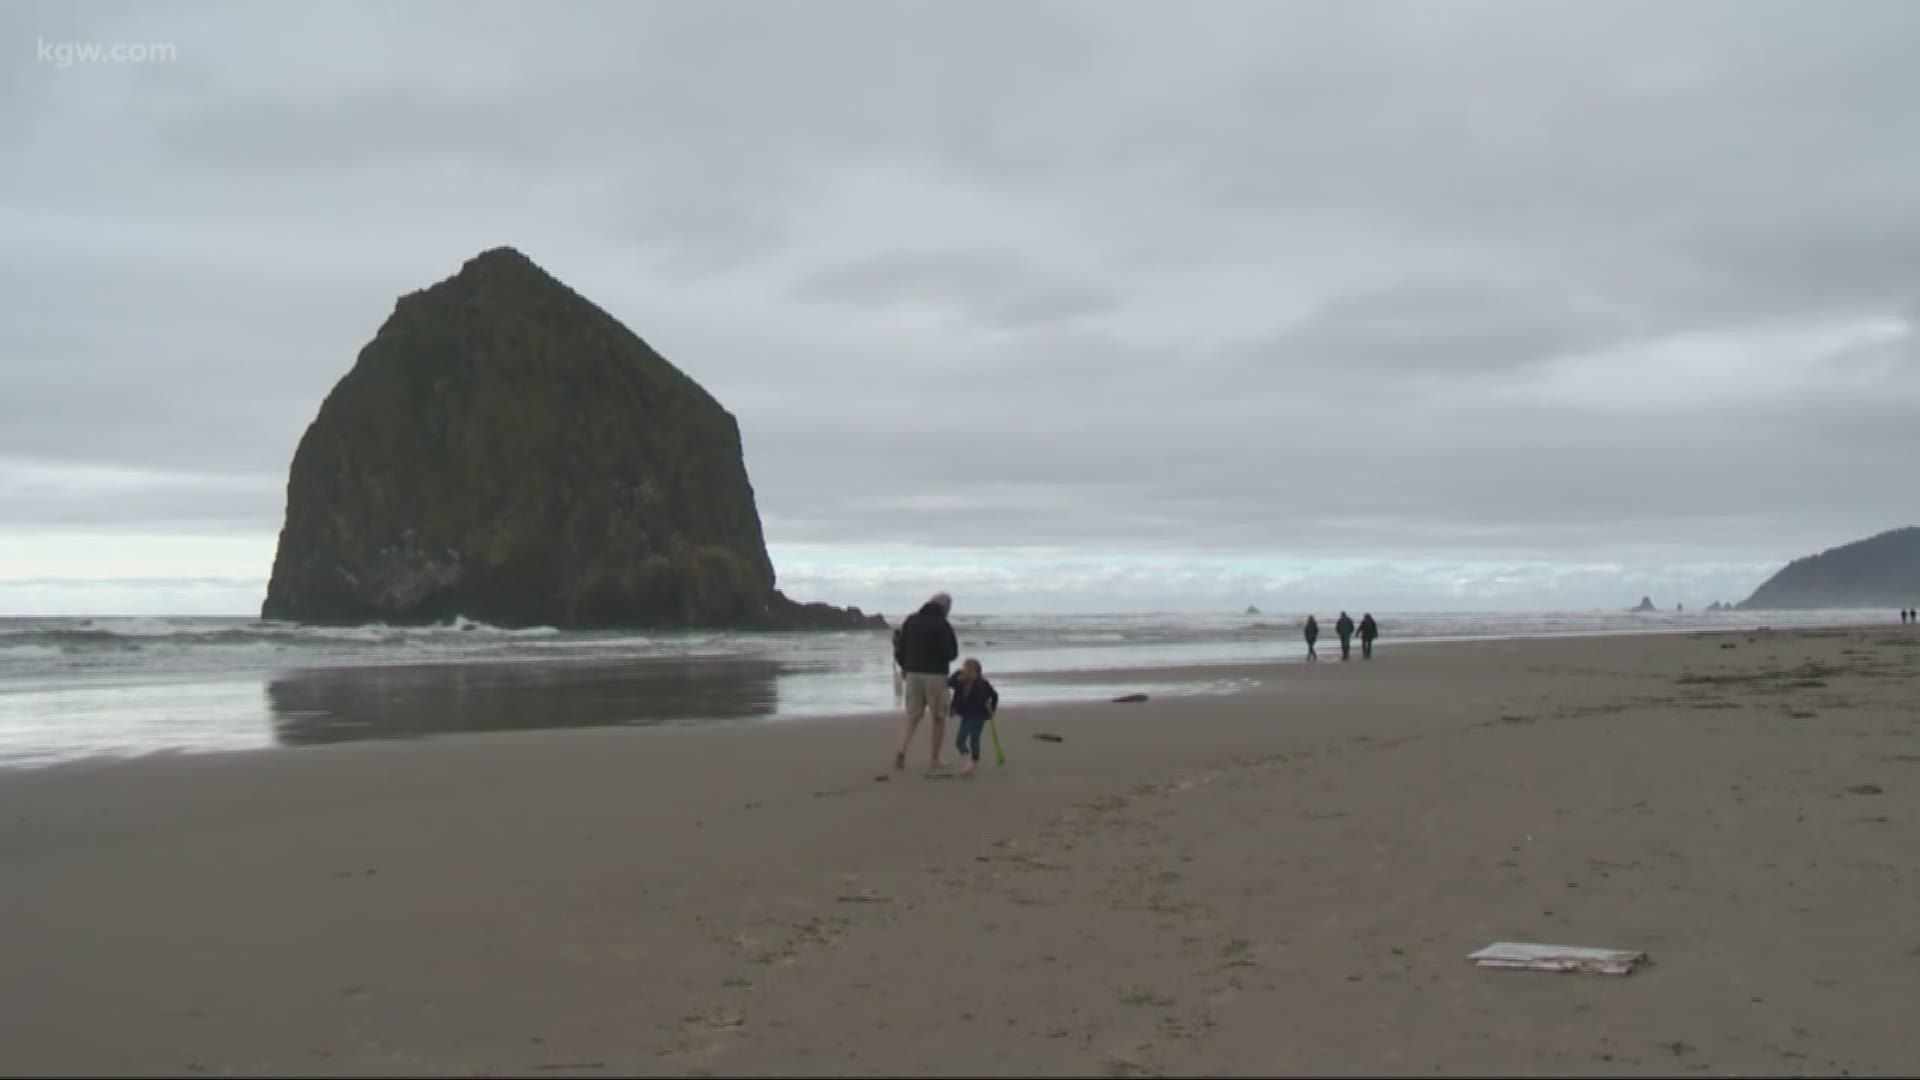 Haystack Rock is falling victim to serious erosion.